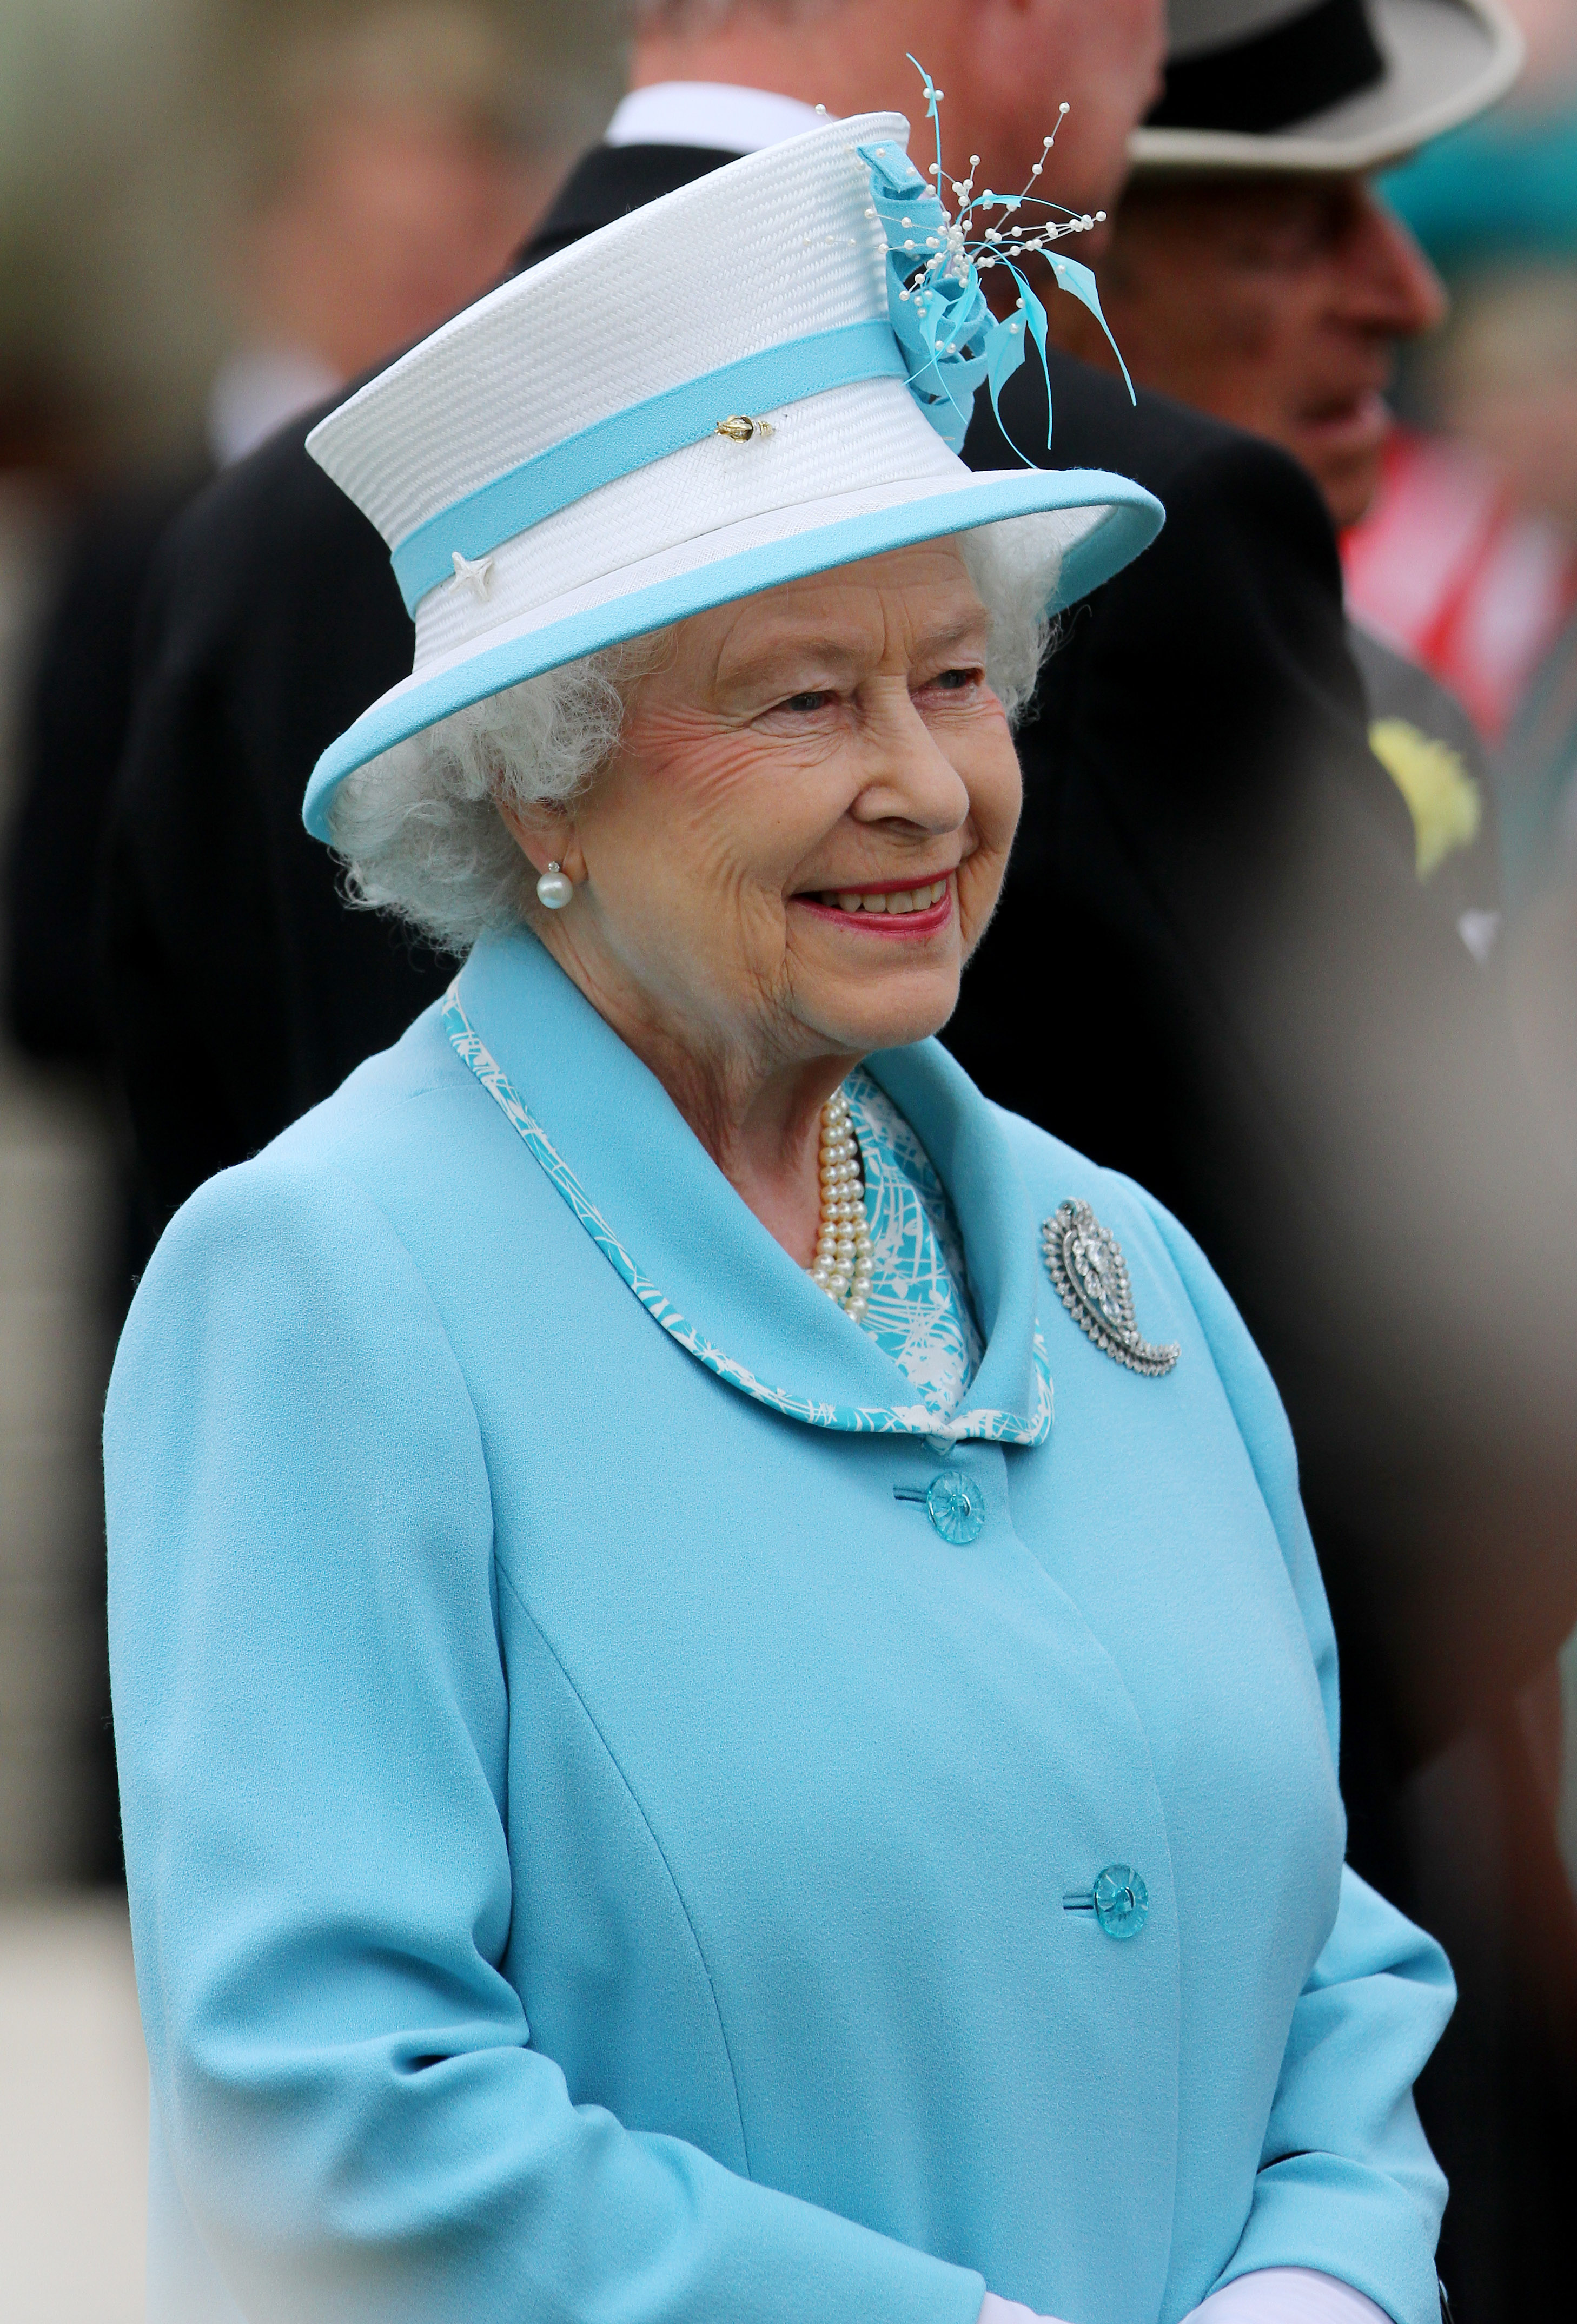 Queen Elizabeth II hosting a tea party in the gardens of Buckingham Palace in London, England on July 22, 2010 | Source: Getty Images